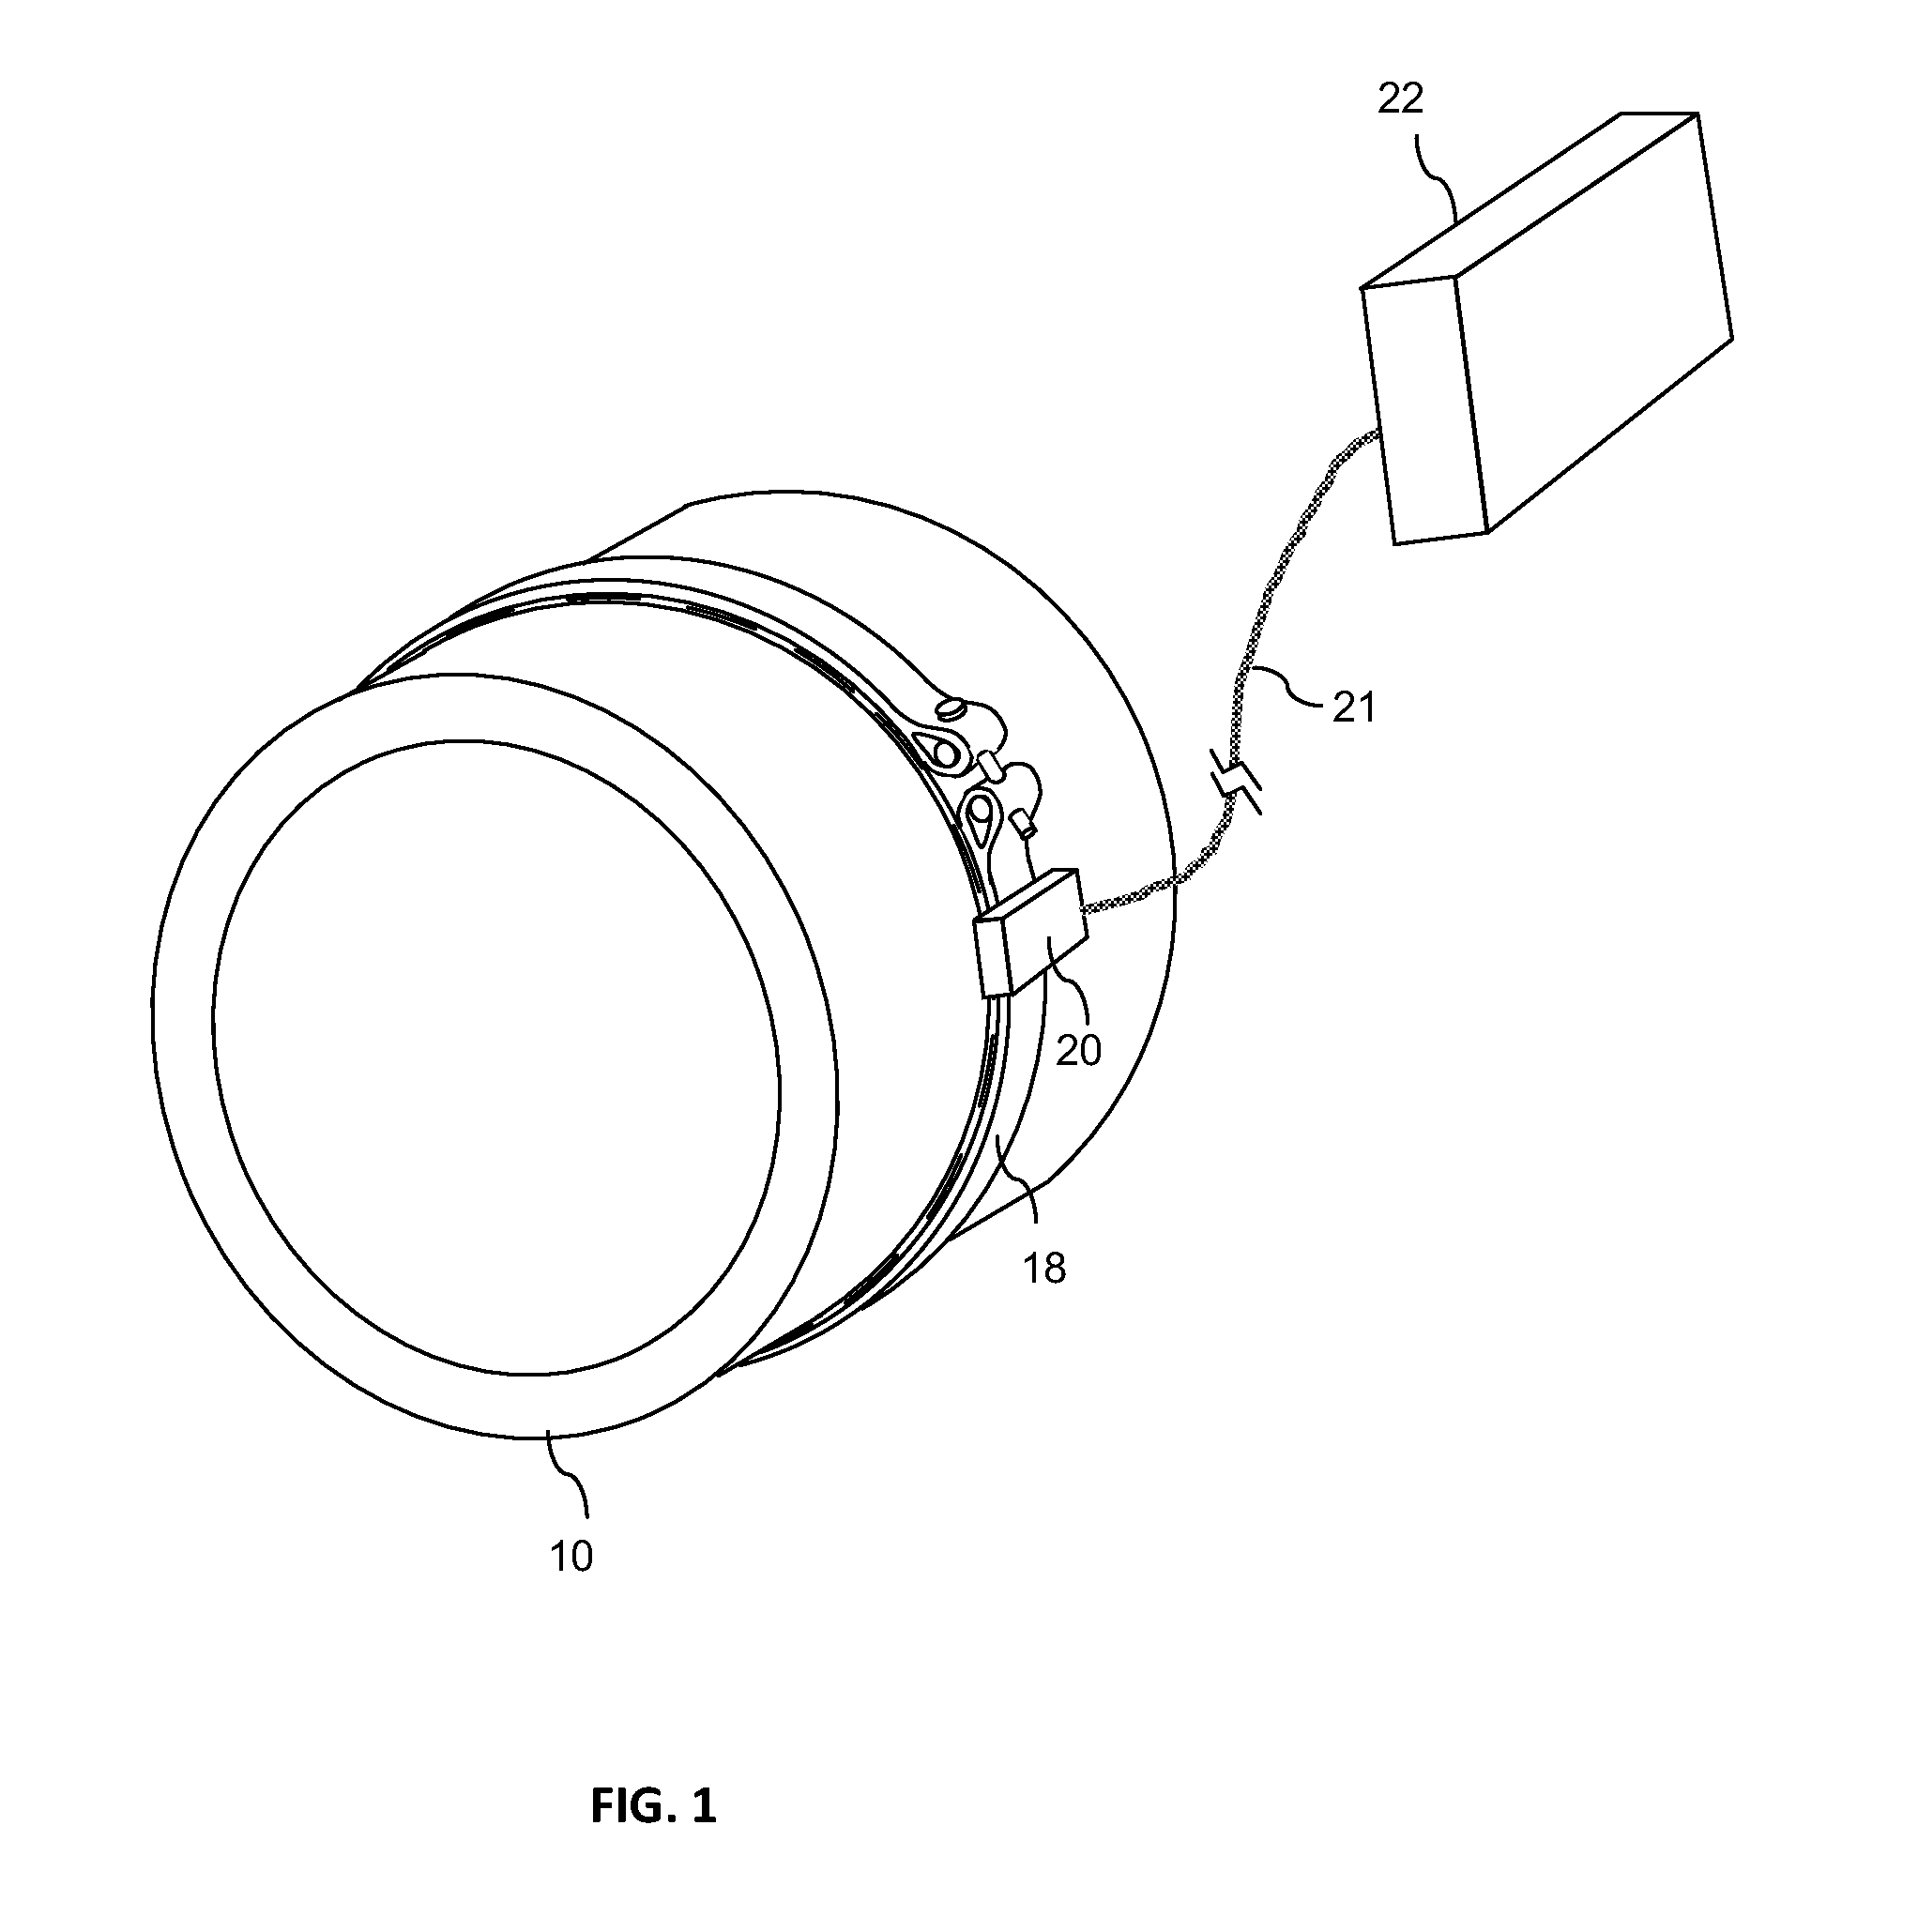 Ultrasonic transducer assembly and system for monitoring structural integrity